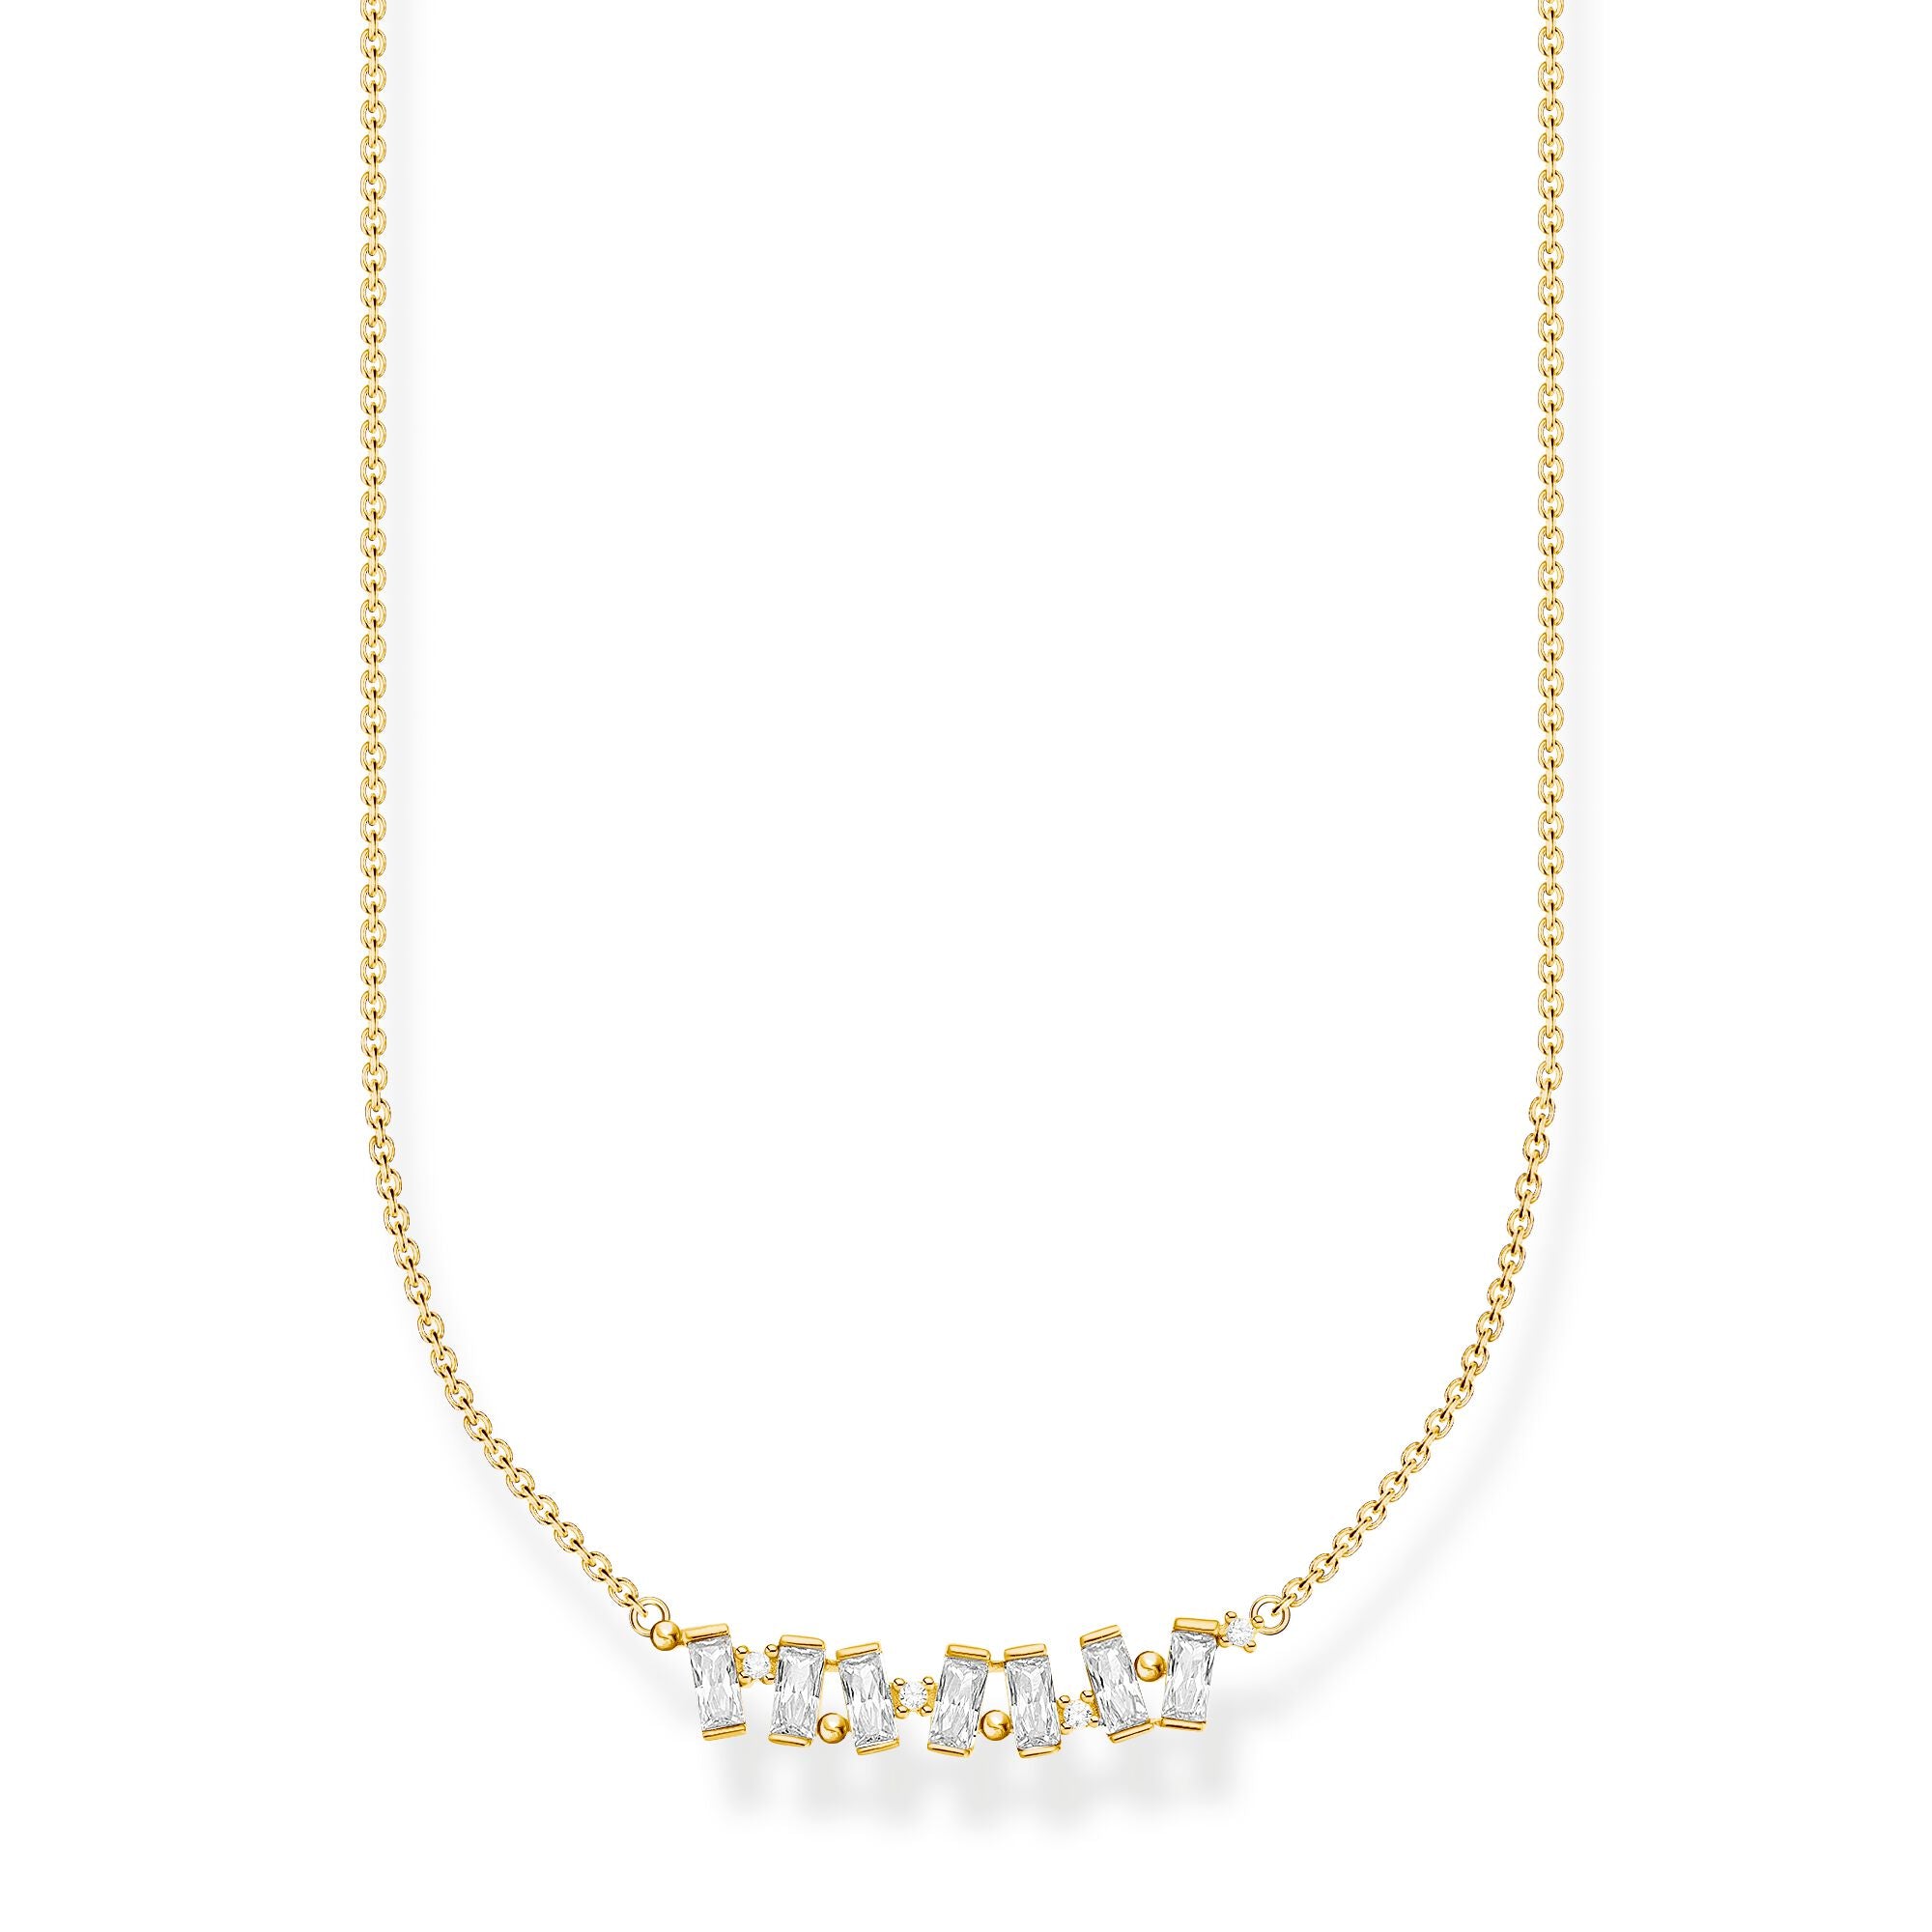 White Baguette Stone Necklace - Gold